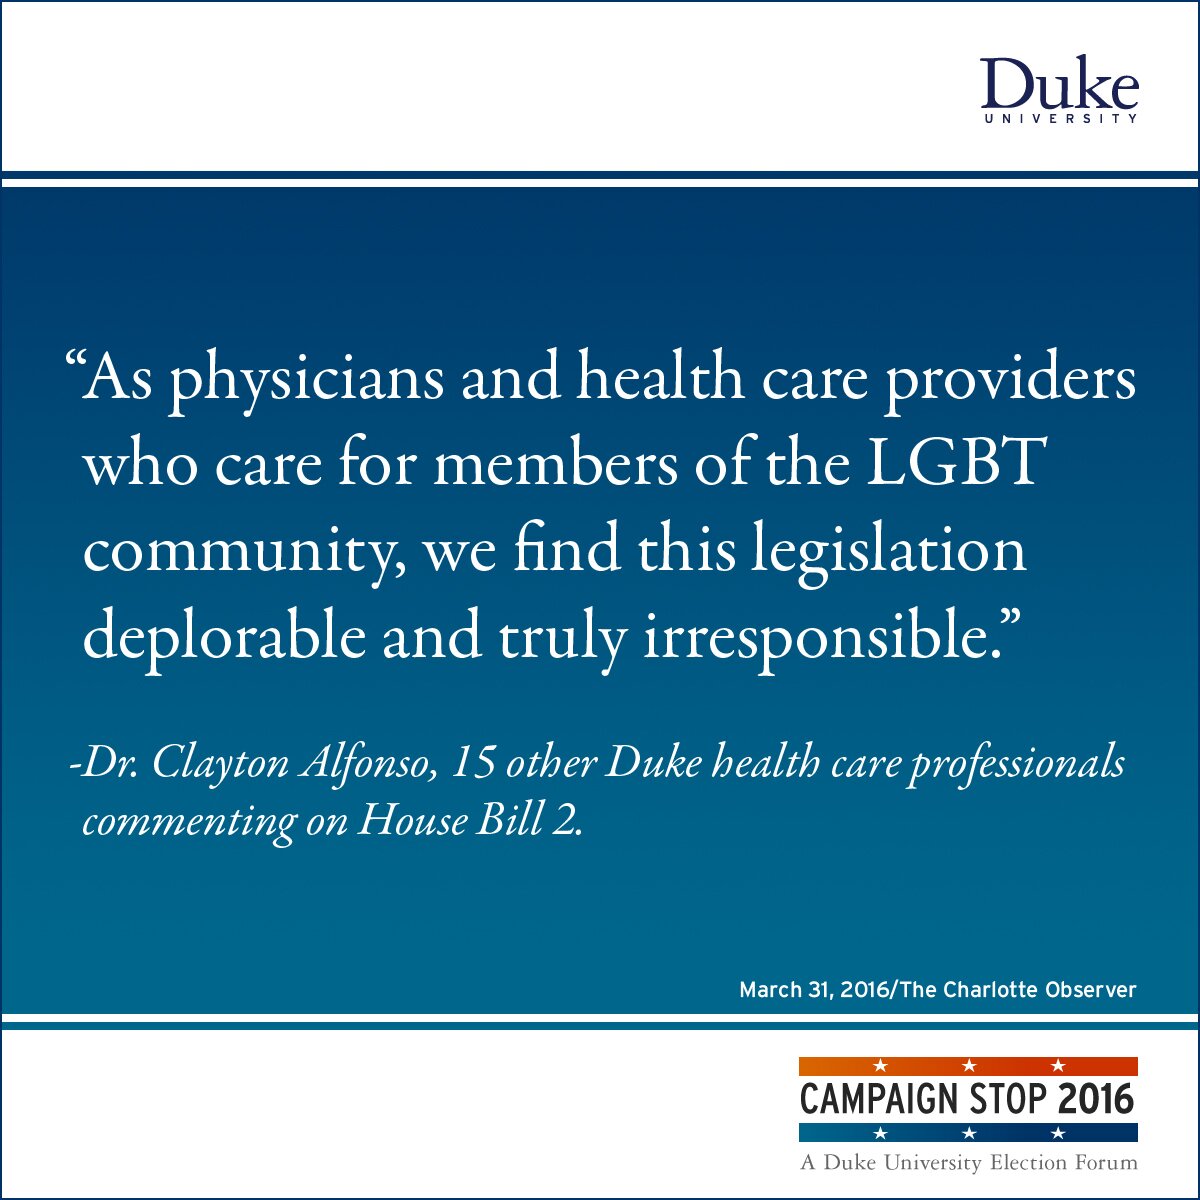 “As physicians and health care providers who care for members of the LGBT community, we find this legislation deplorable and truly irresponsible.” -Dr. Clayton Alfonso, 15 other Duke health care professionals commenting on House Bill 2.